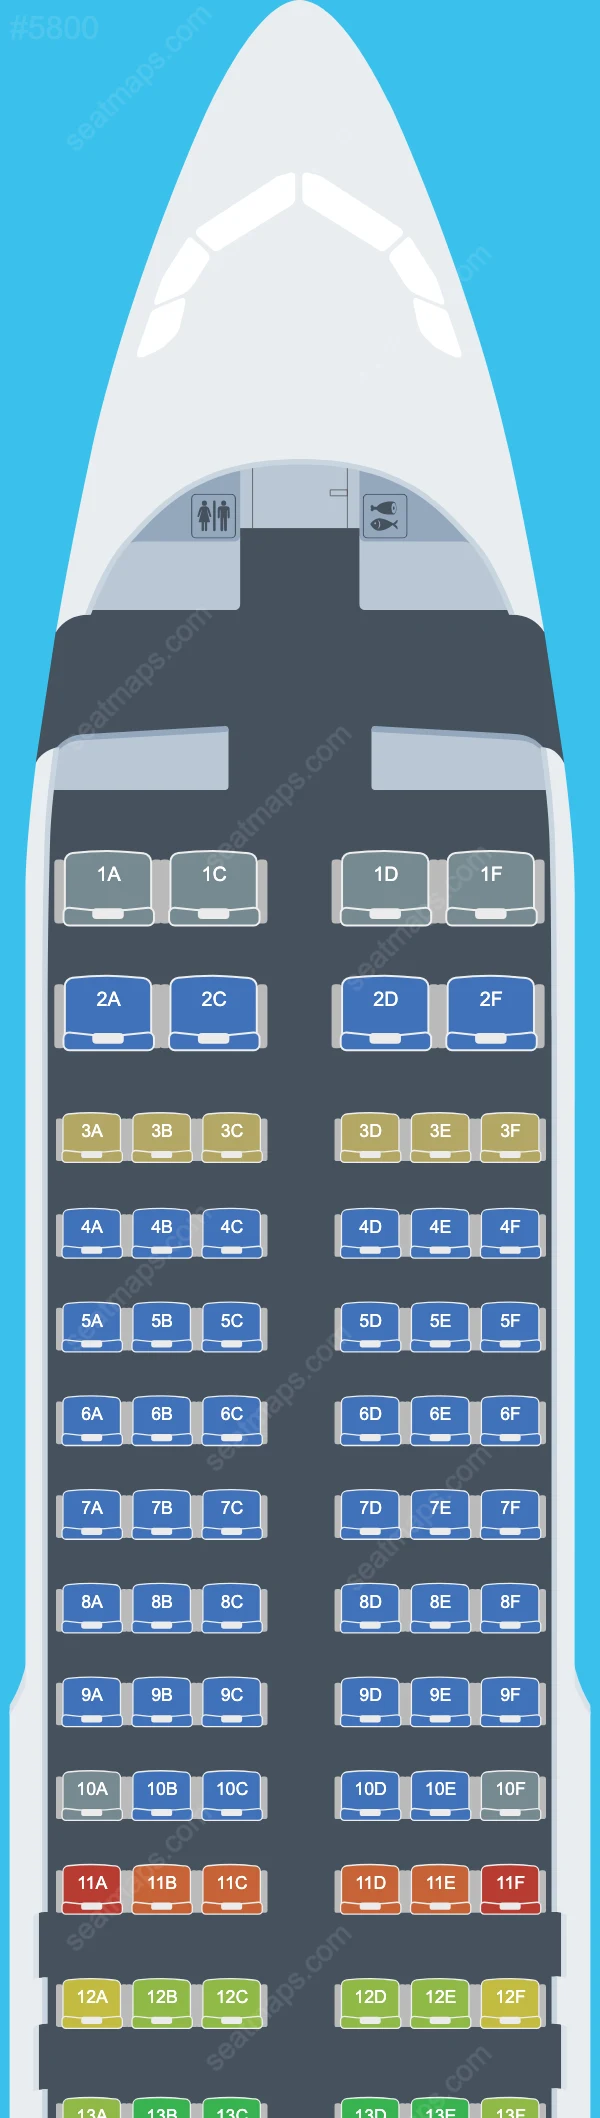 Spirit Airlines Airbus A320 Seat Maps A320-200neo